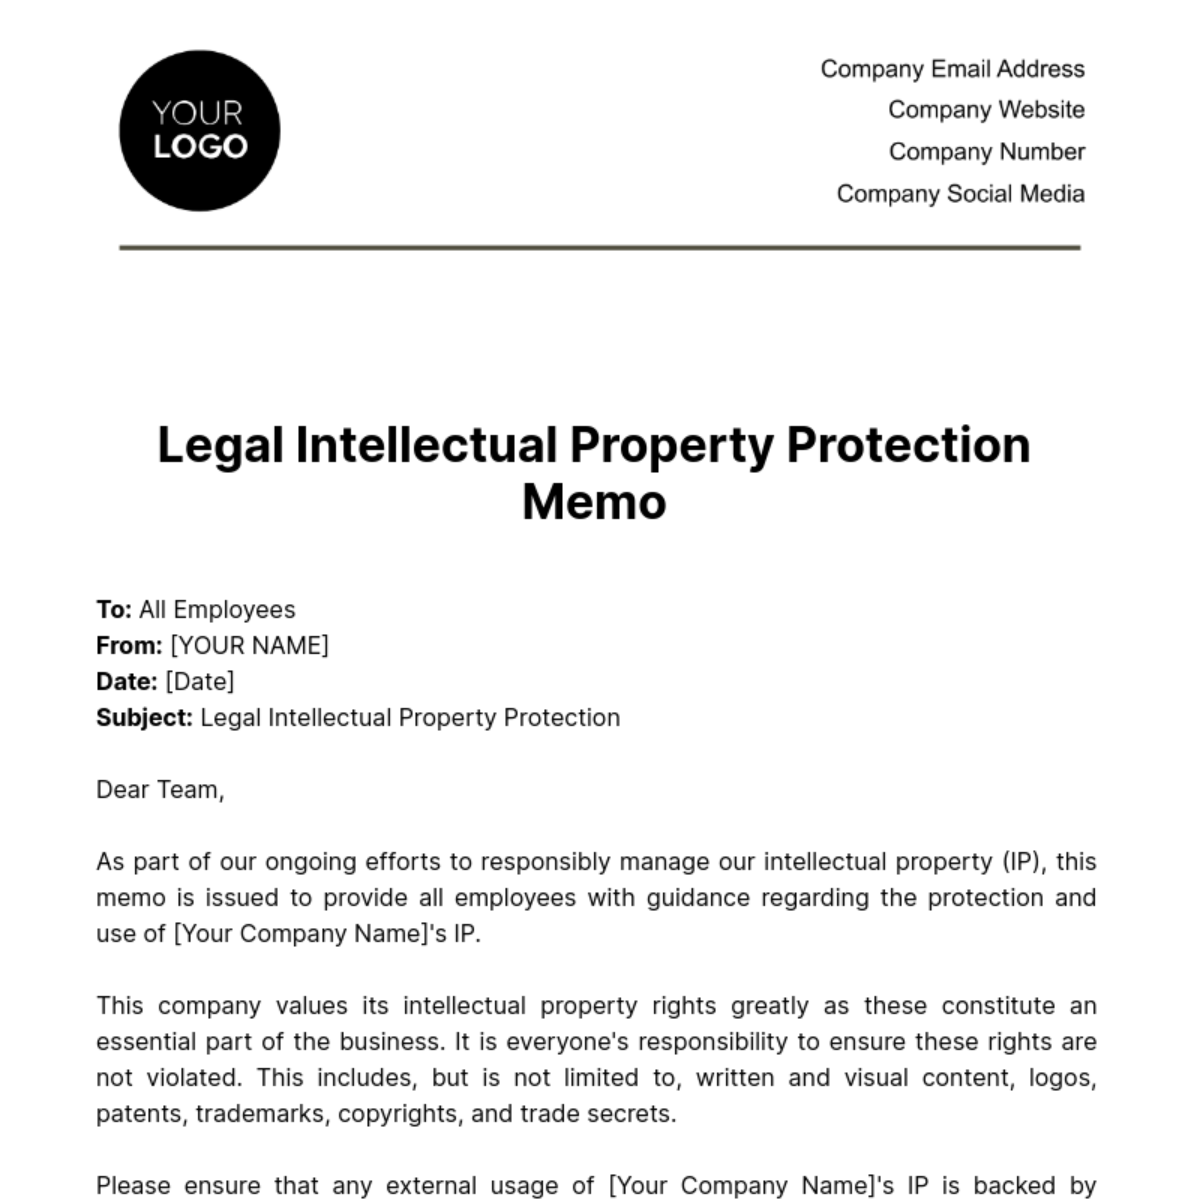 Free Legal Intellectual Property Protection Memo Template